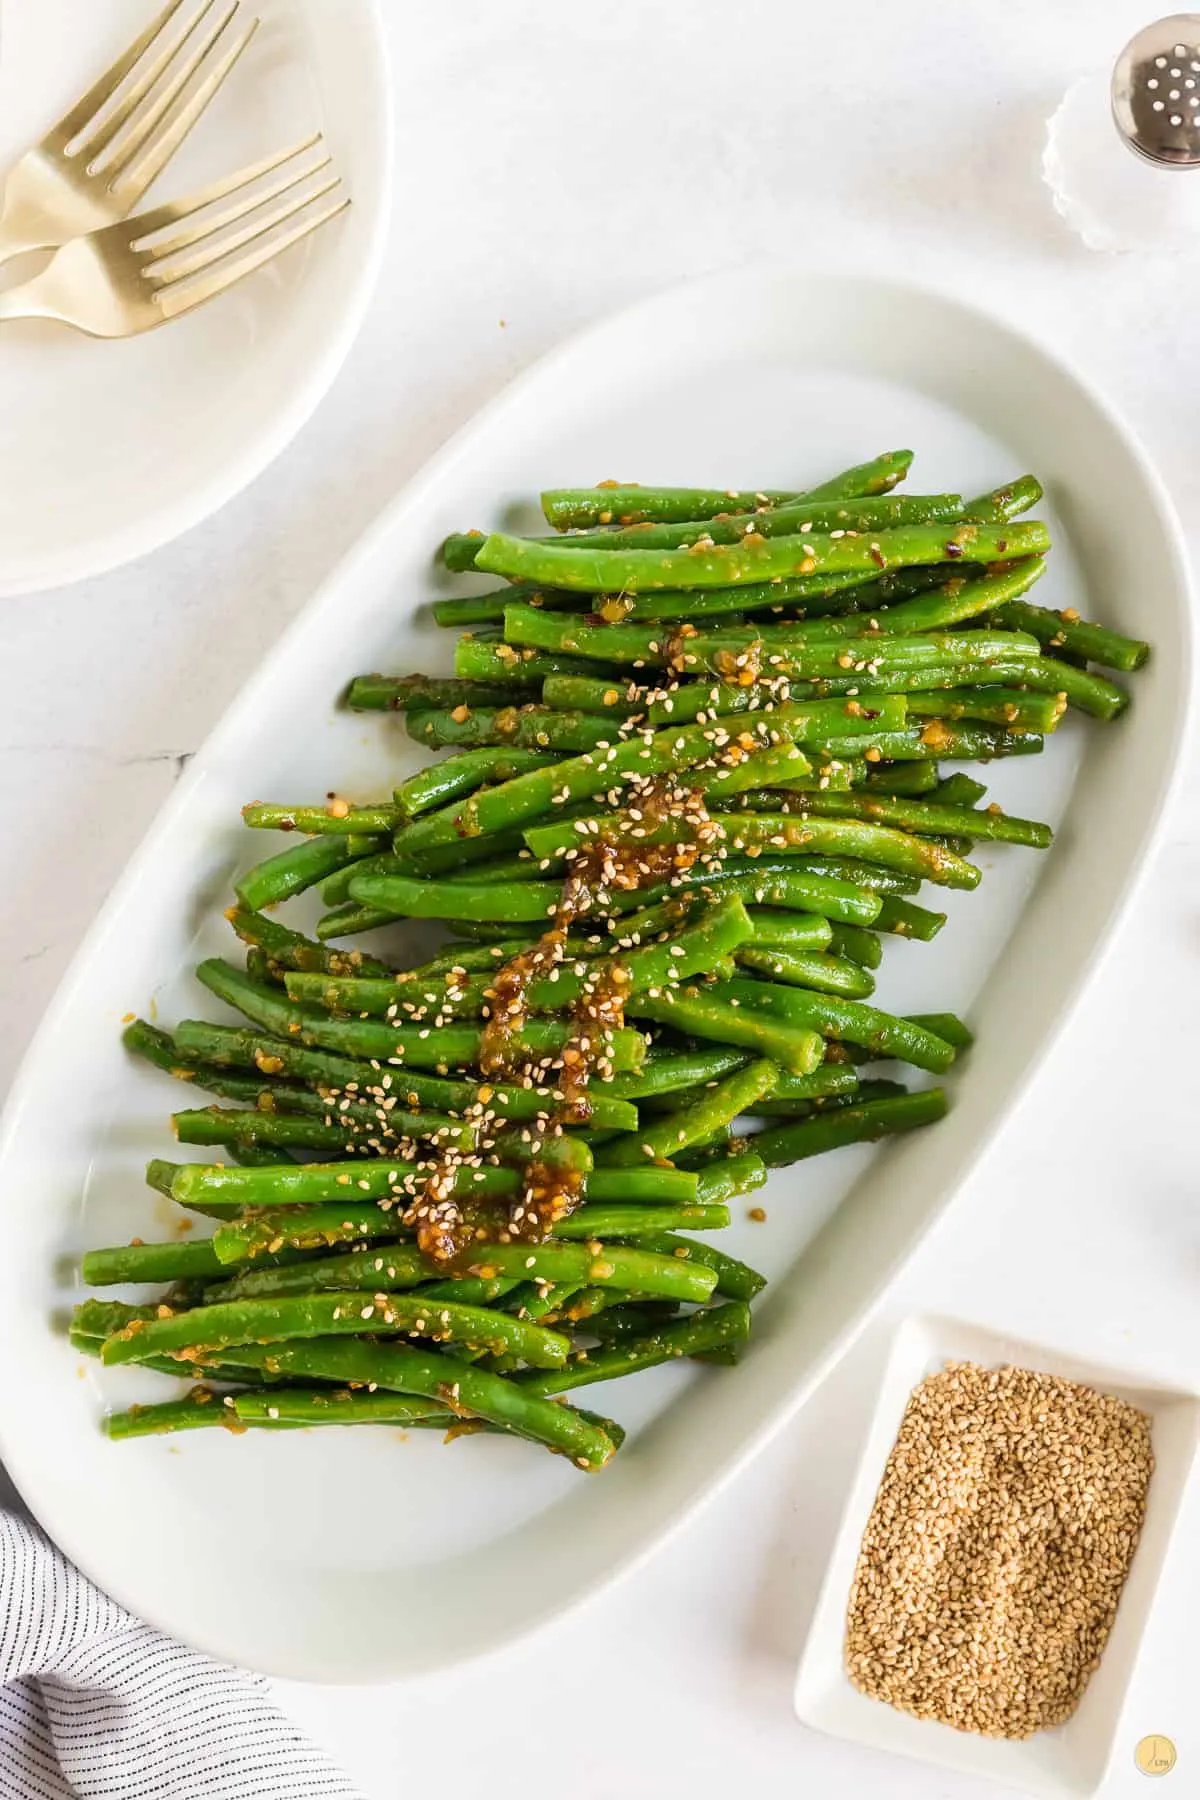 Top view of a white oval plate filled with spicy green beans in a brown sesame seed sauce. 